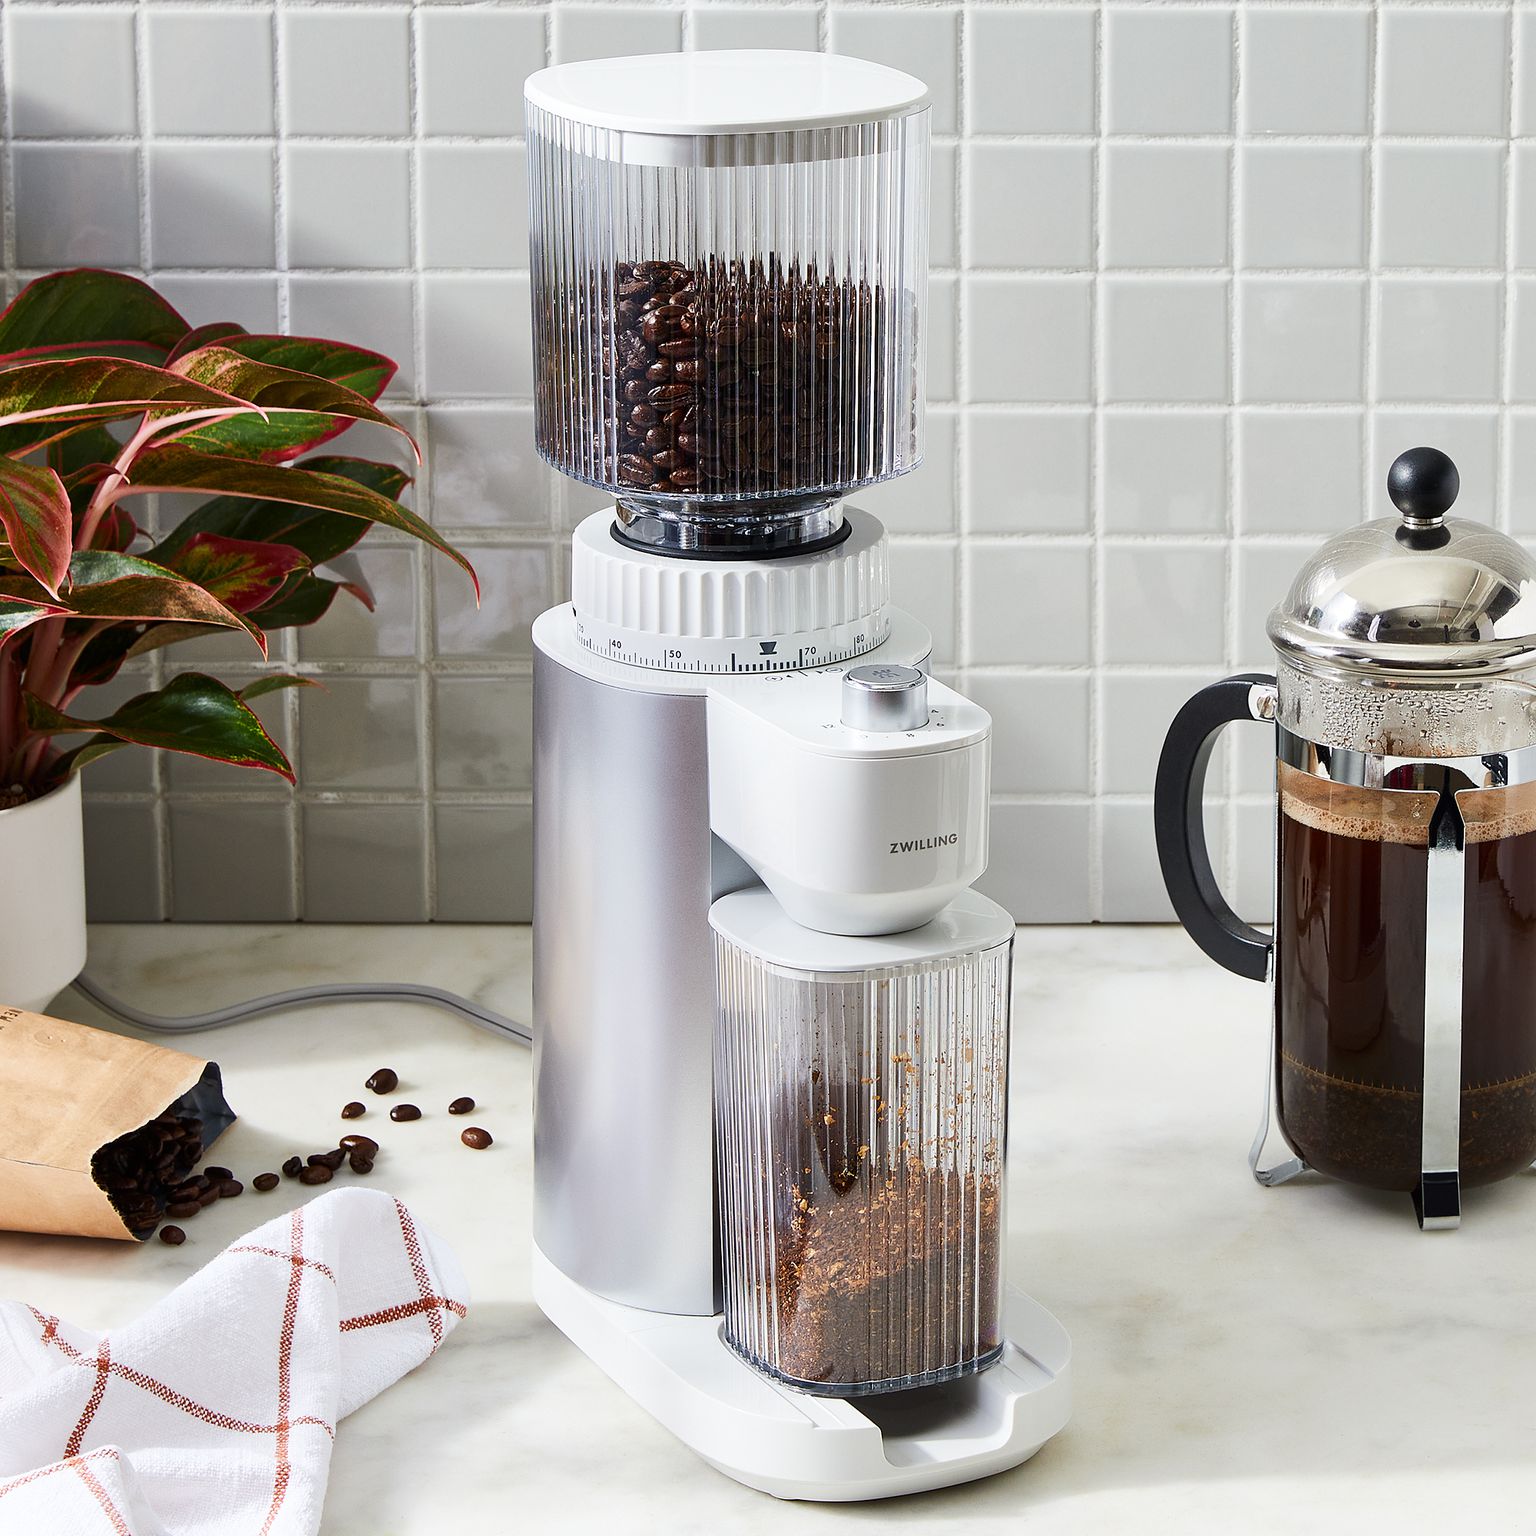 NEW ZWILLING Enfinigy Coffee Bean Grinder